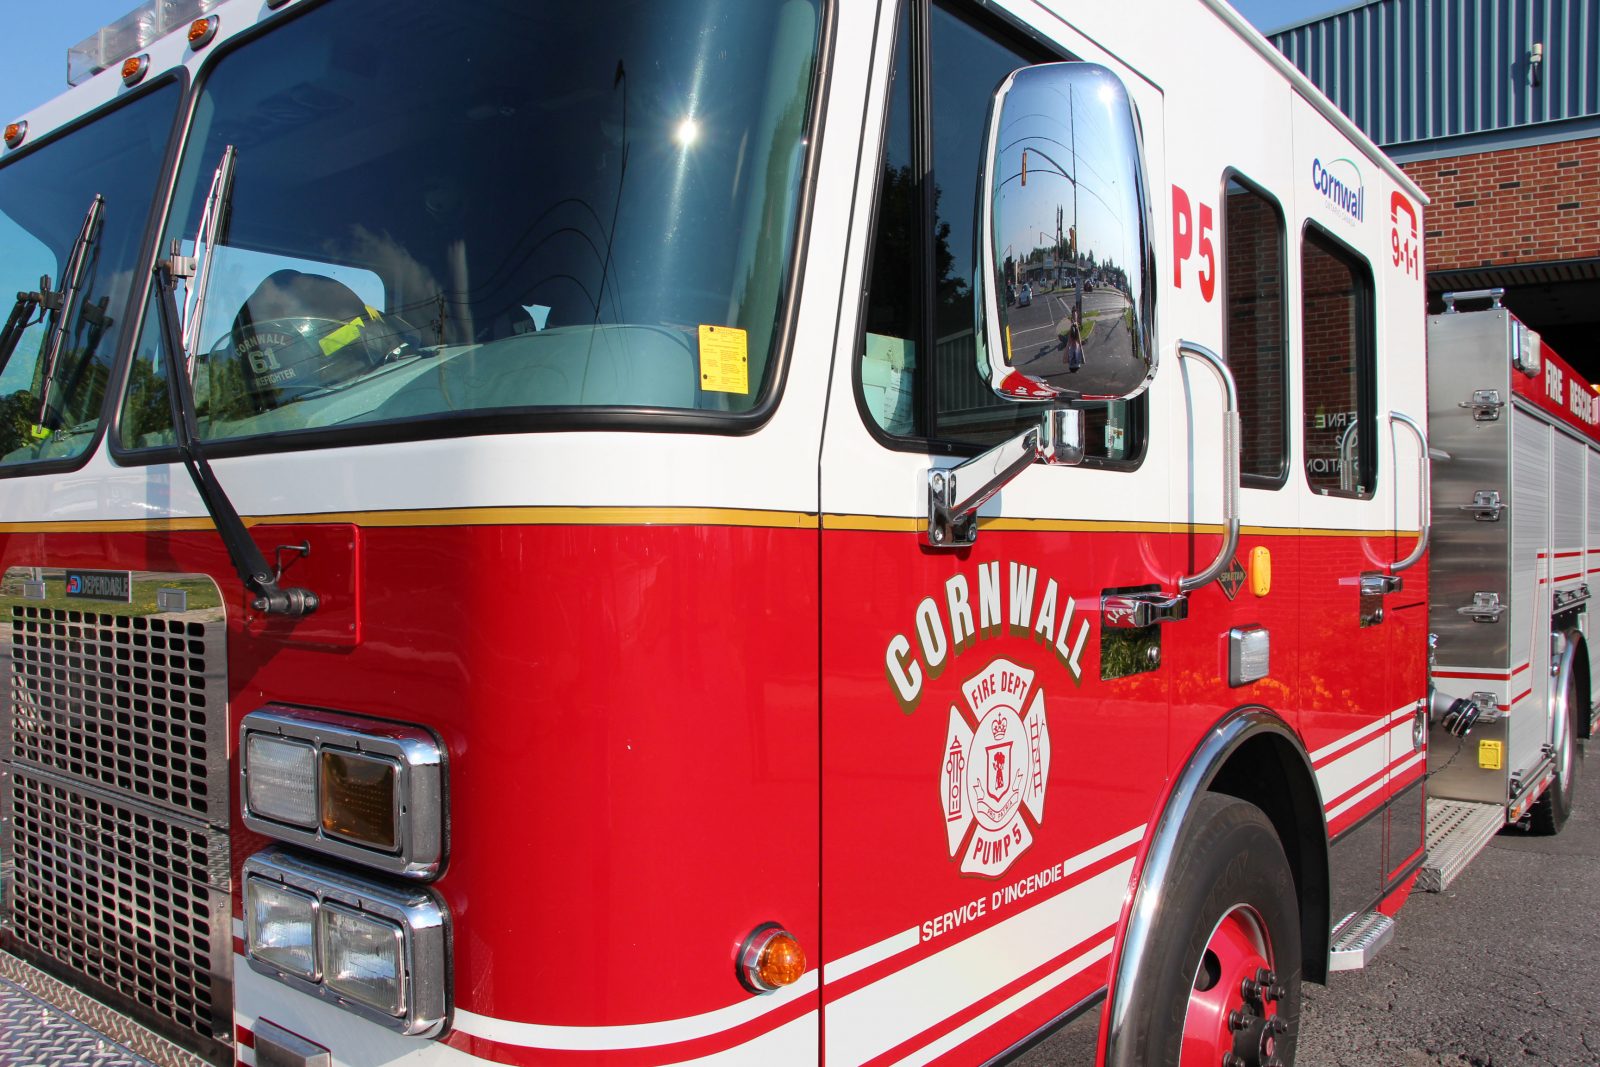 Tossed cigarette sparked Ontario Street house fire